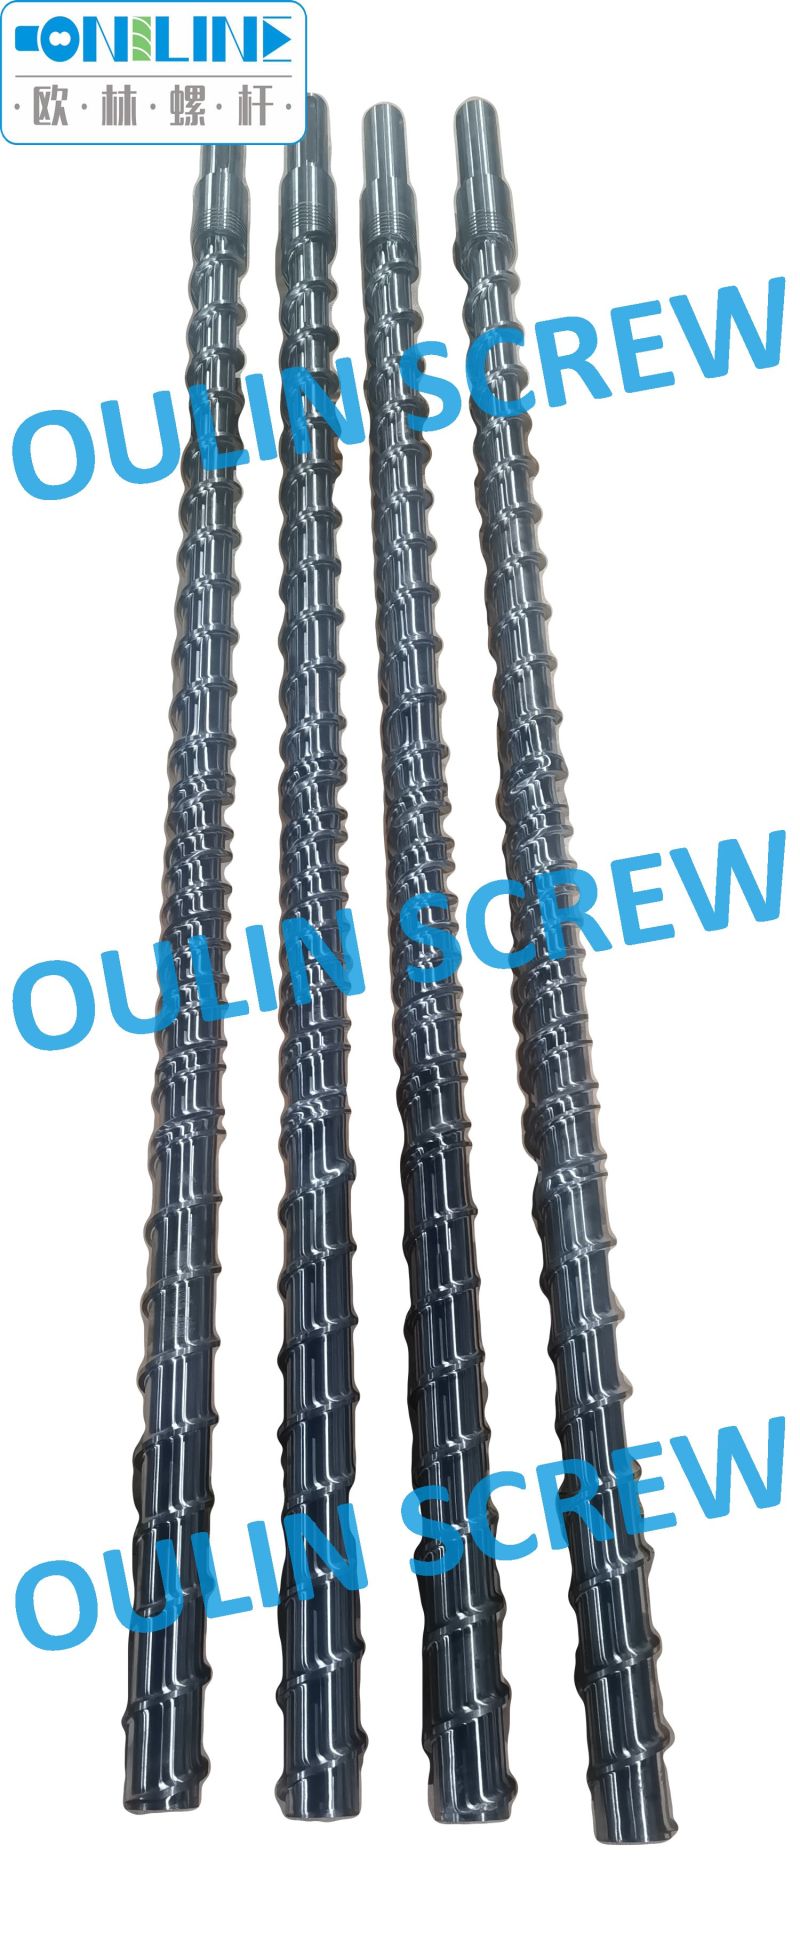 Jwell Extrusion Screw and Barrel for Rigid PVC Profiles